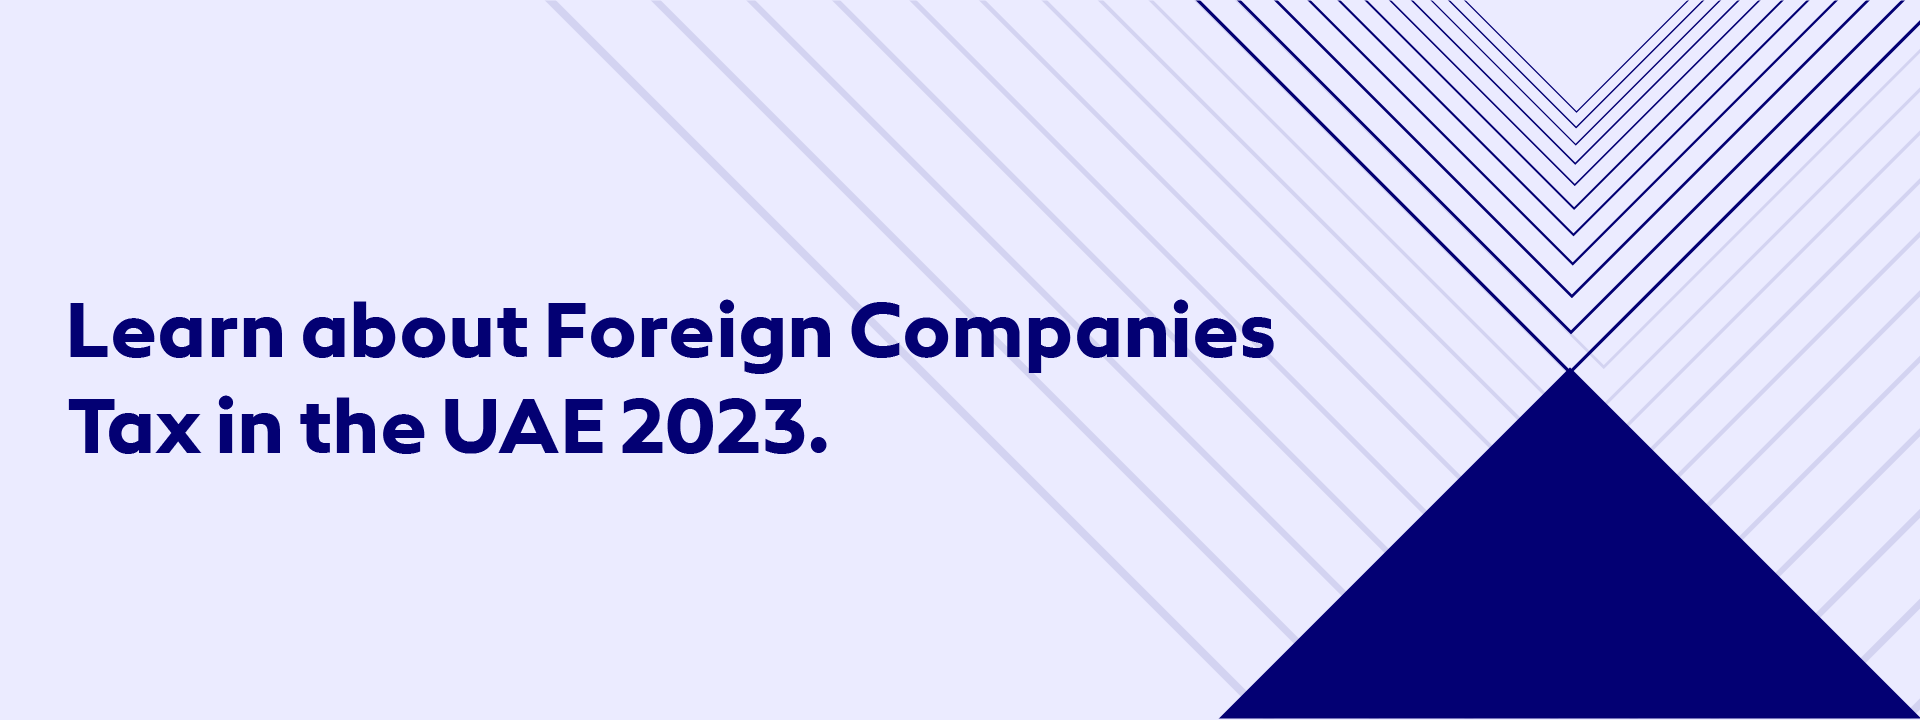 Announcing Foreign Companies Tax in the UAE 2023